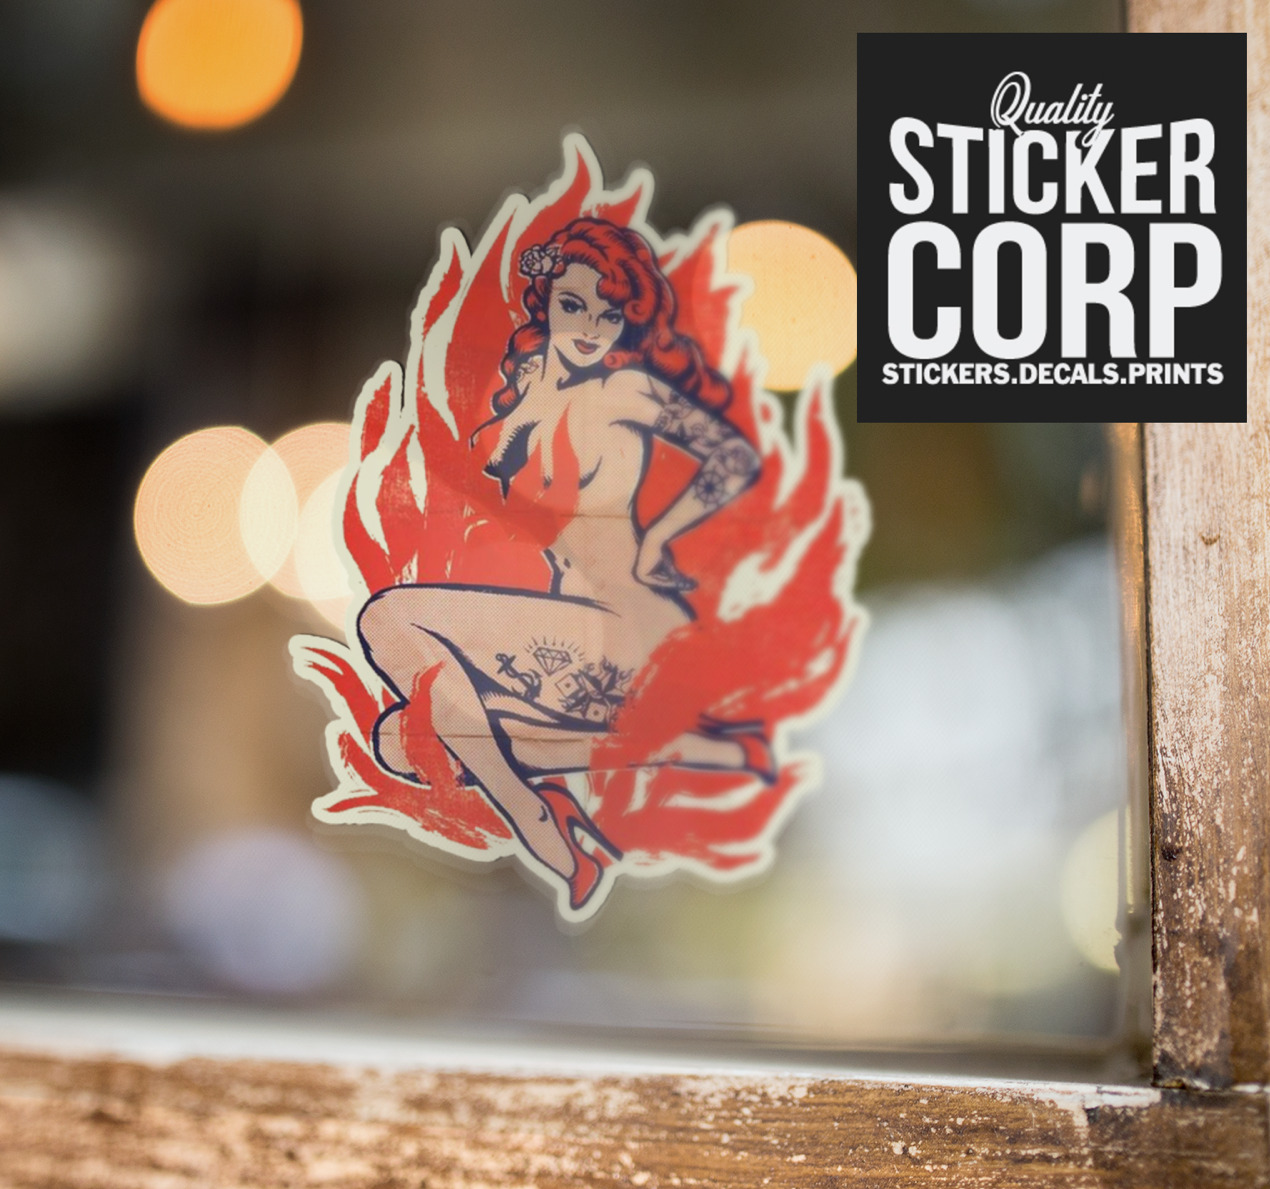 VINTAGE 1950'S STYLE FLAMING PIN-UP GIRL RETRO TRAVEL DECAL STICKER